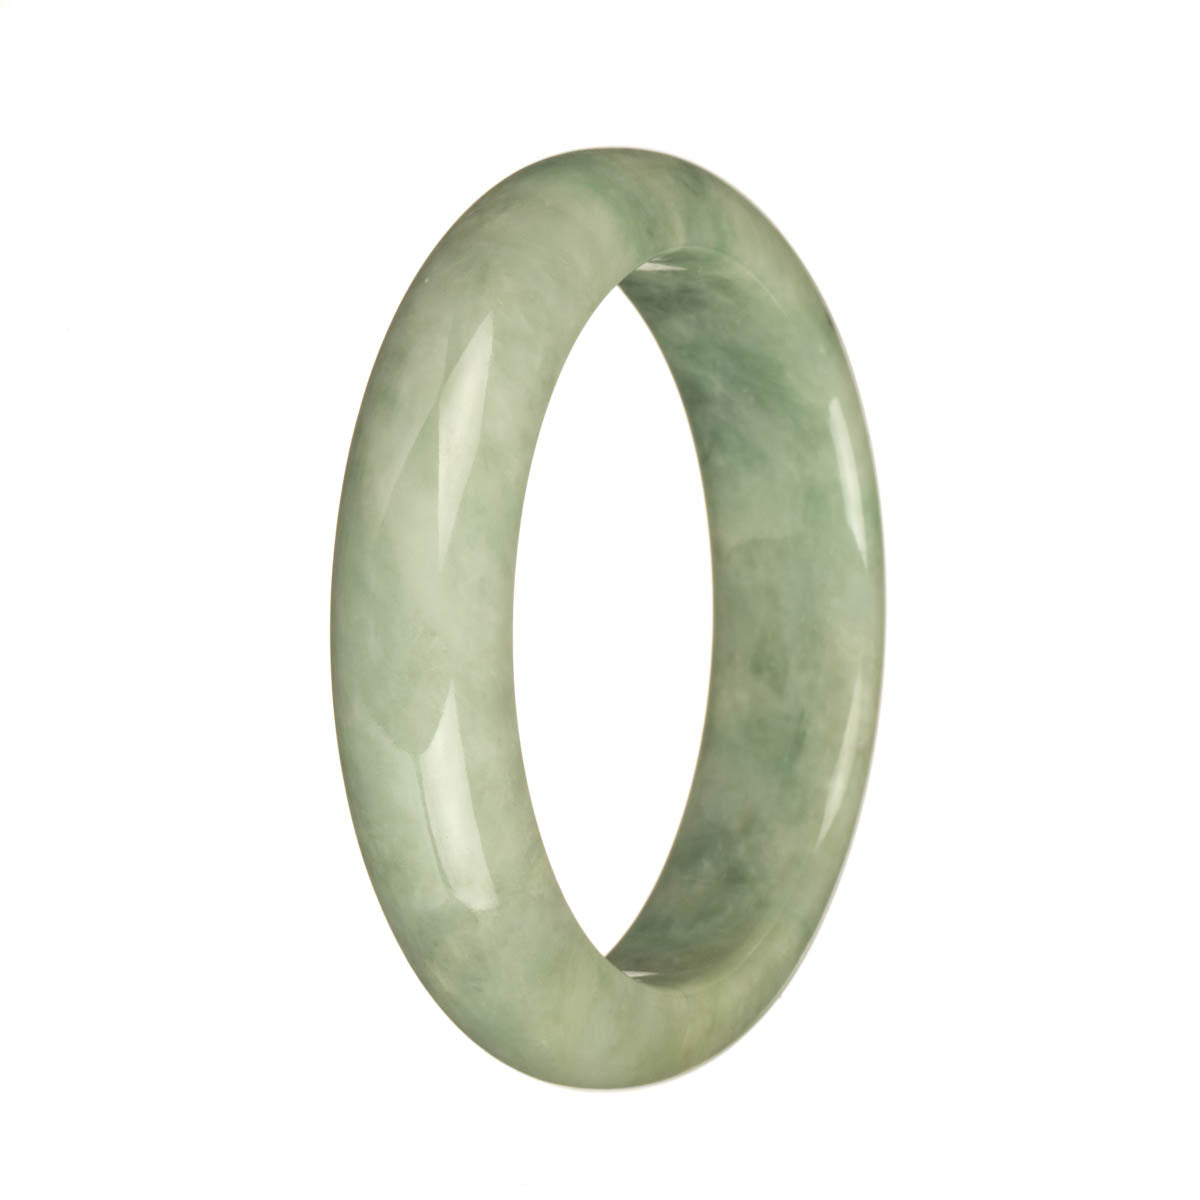 A beautiful jadeite bangle with a unique combination of light green, apple green, and deep green patterns, resembling a half moon shape.